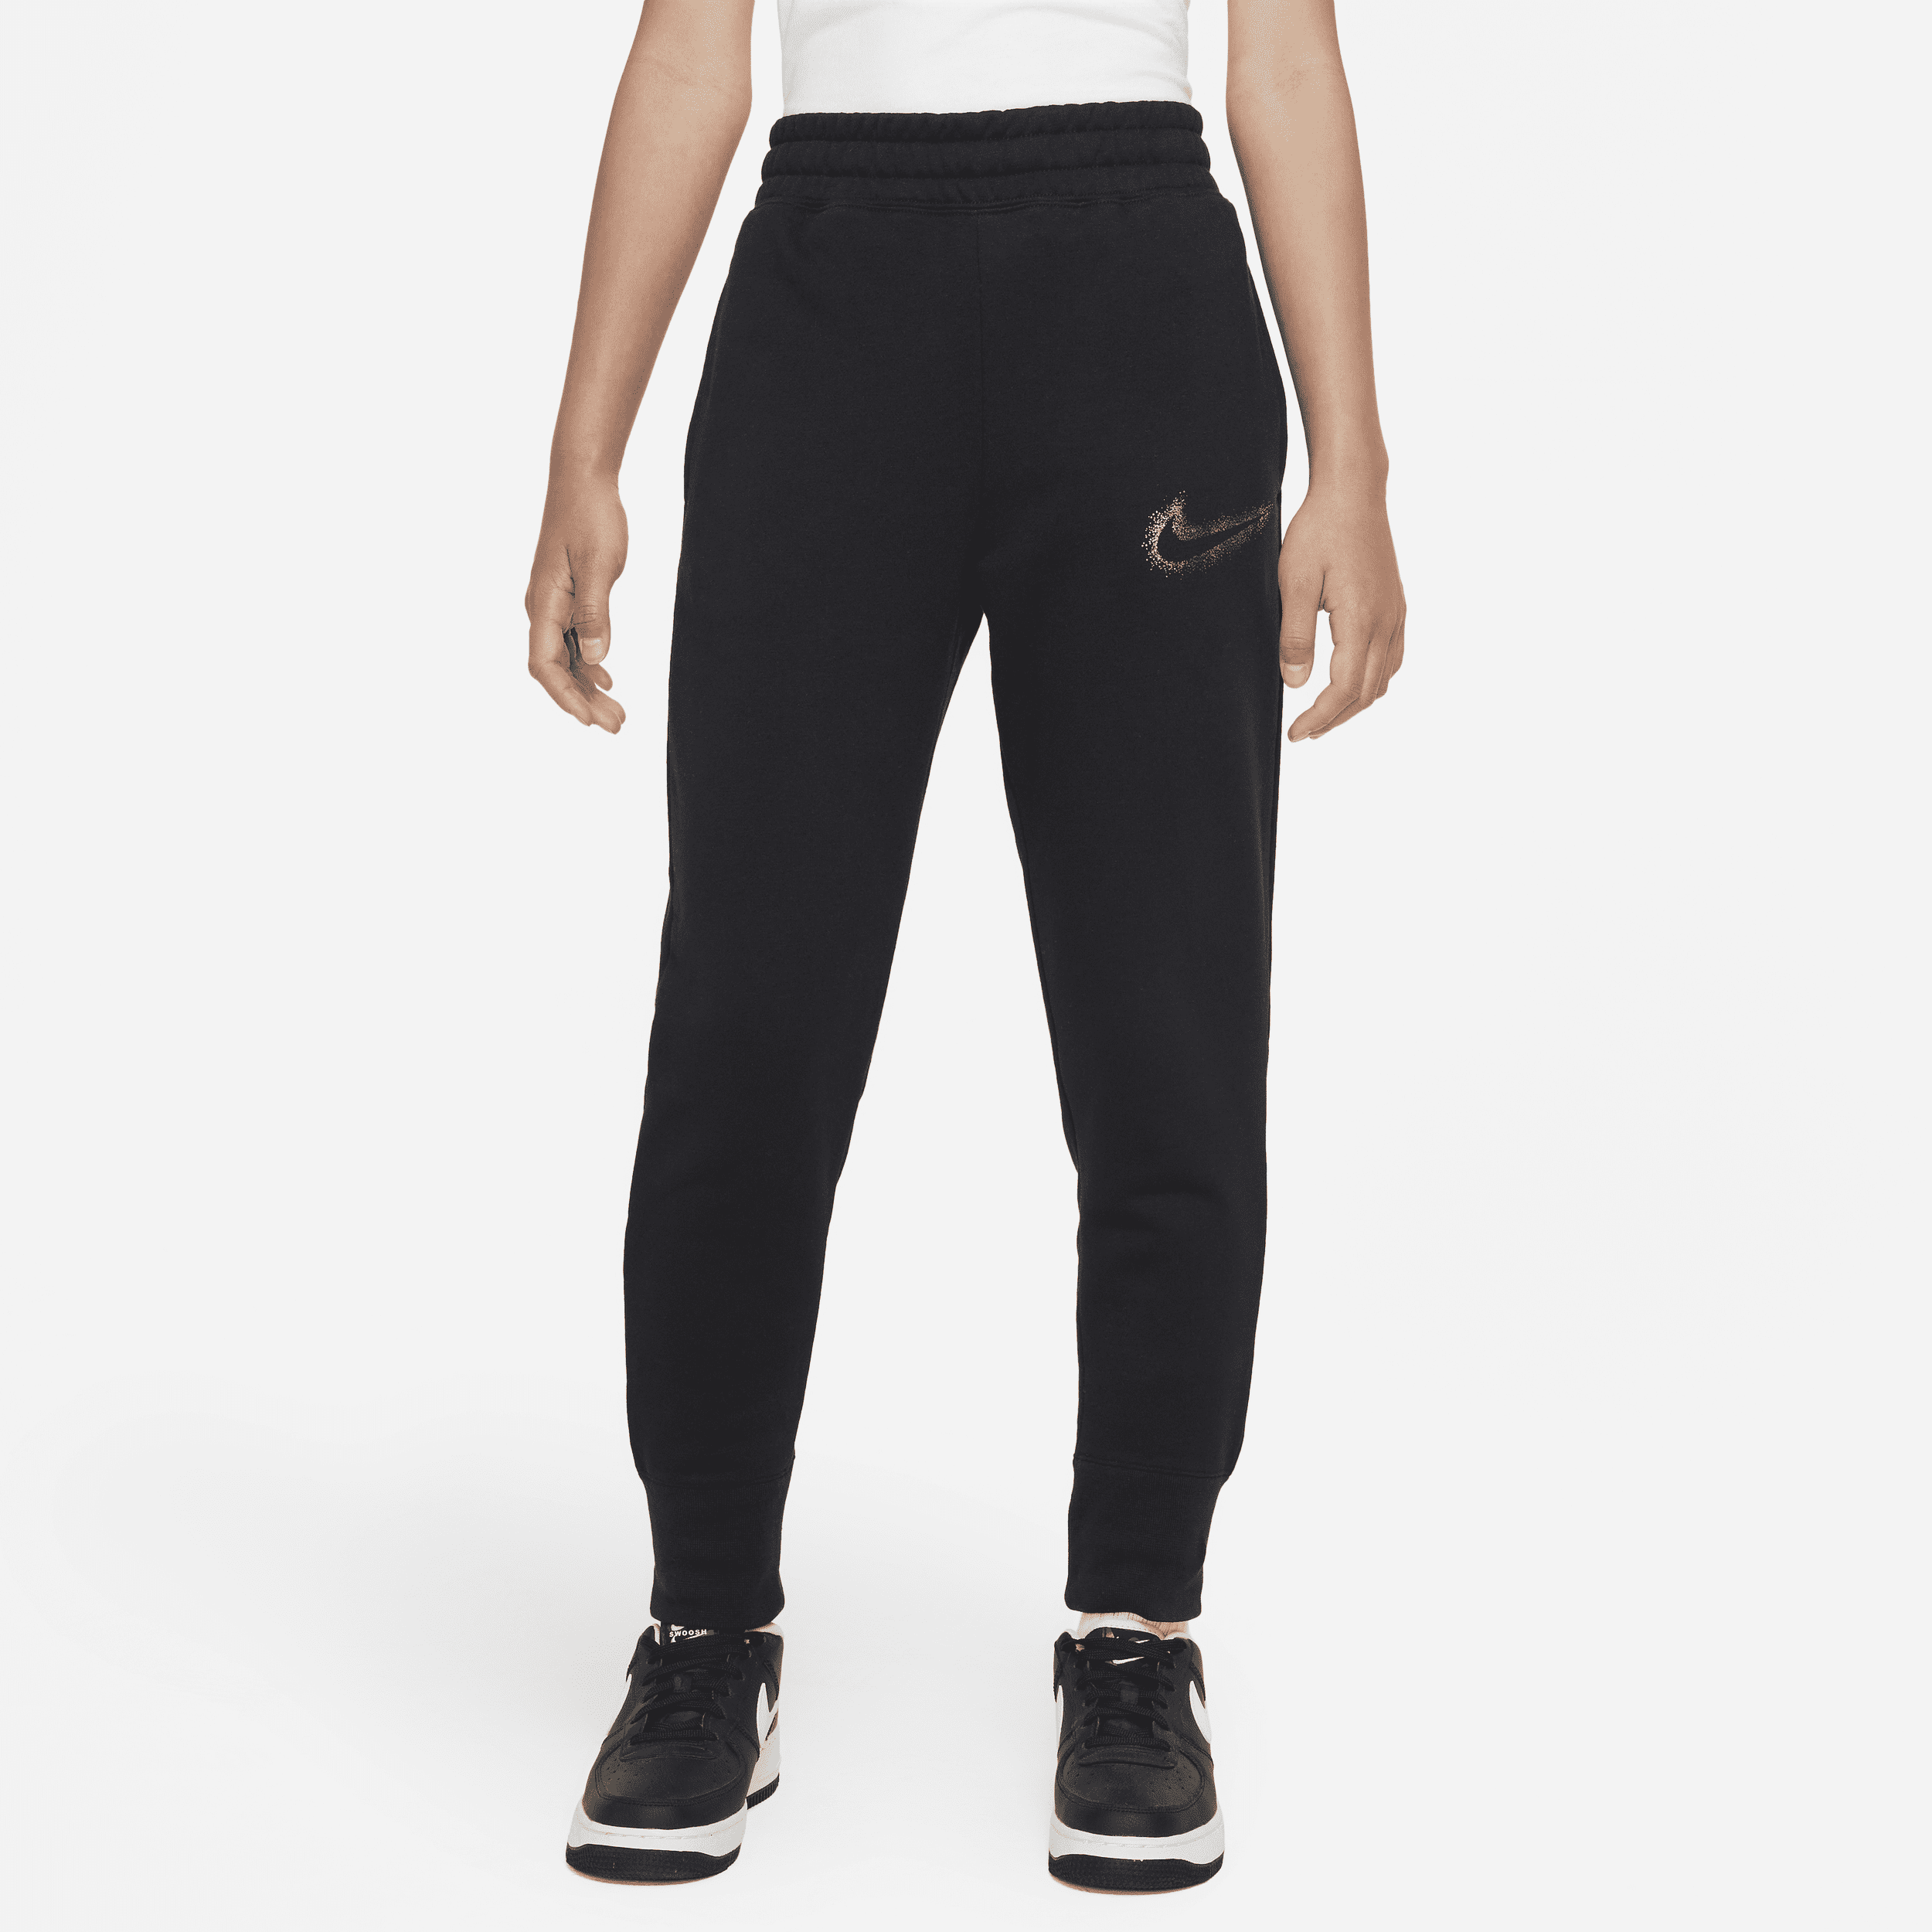 Shop WideLeg Fleece Sweatpants for Women from latest collection at Forever  21  473047